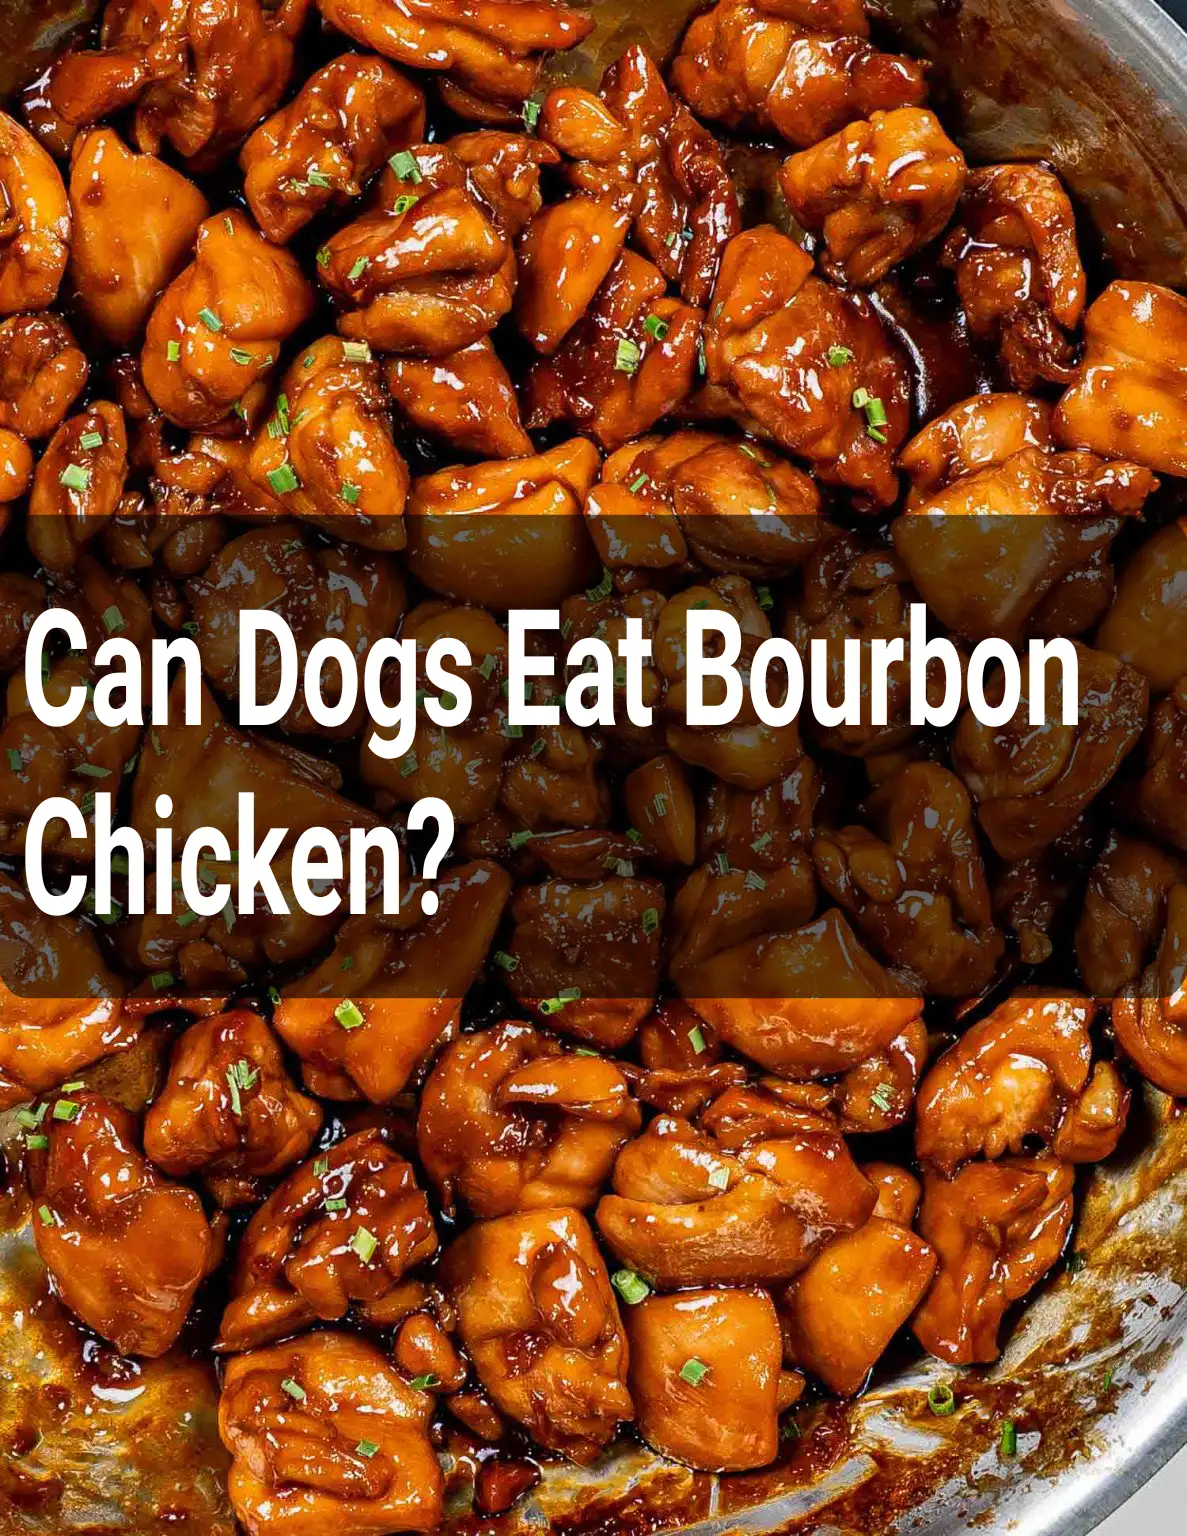 Can Dogs Eat Bourbon Chicken?